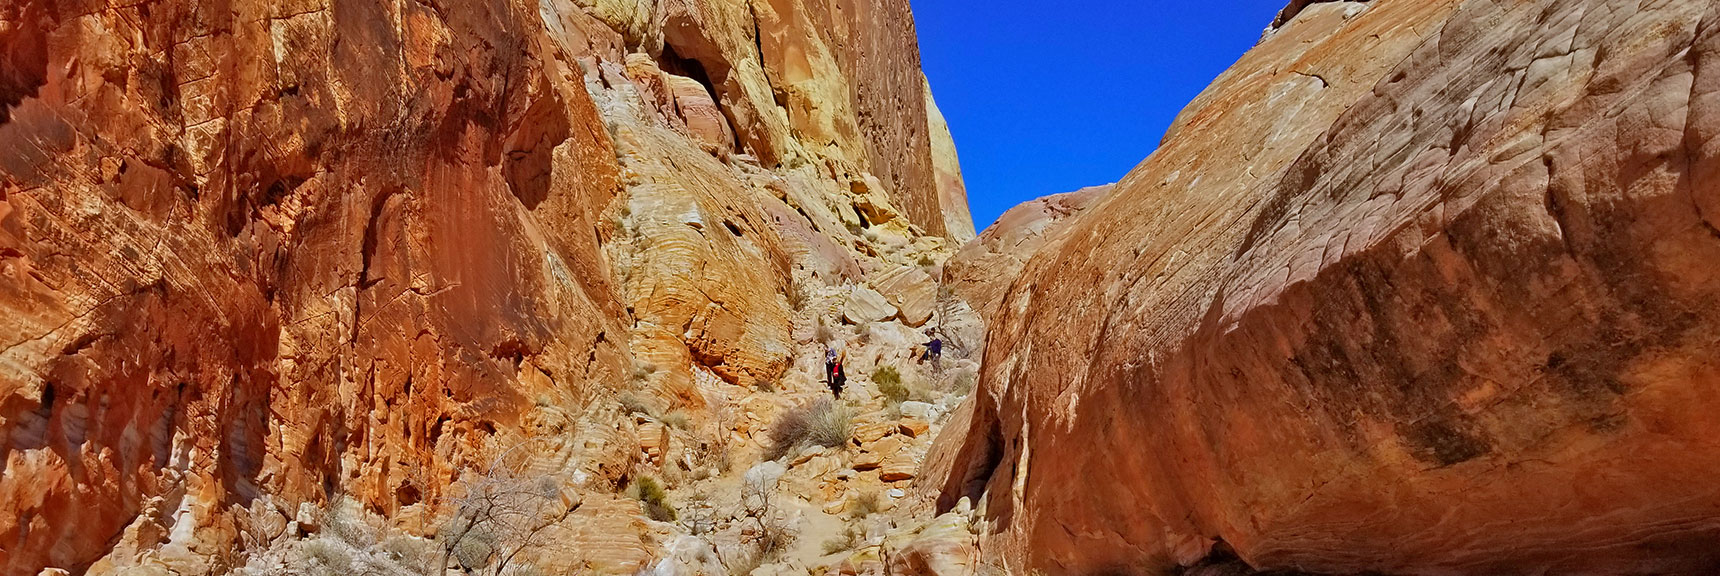 Looking Back Up at the Initial Descent Route in White Domes Loop Trail in Valley of Fire State Park, Nevada